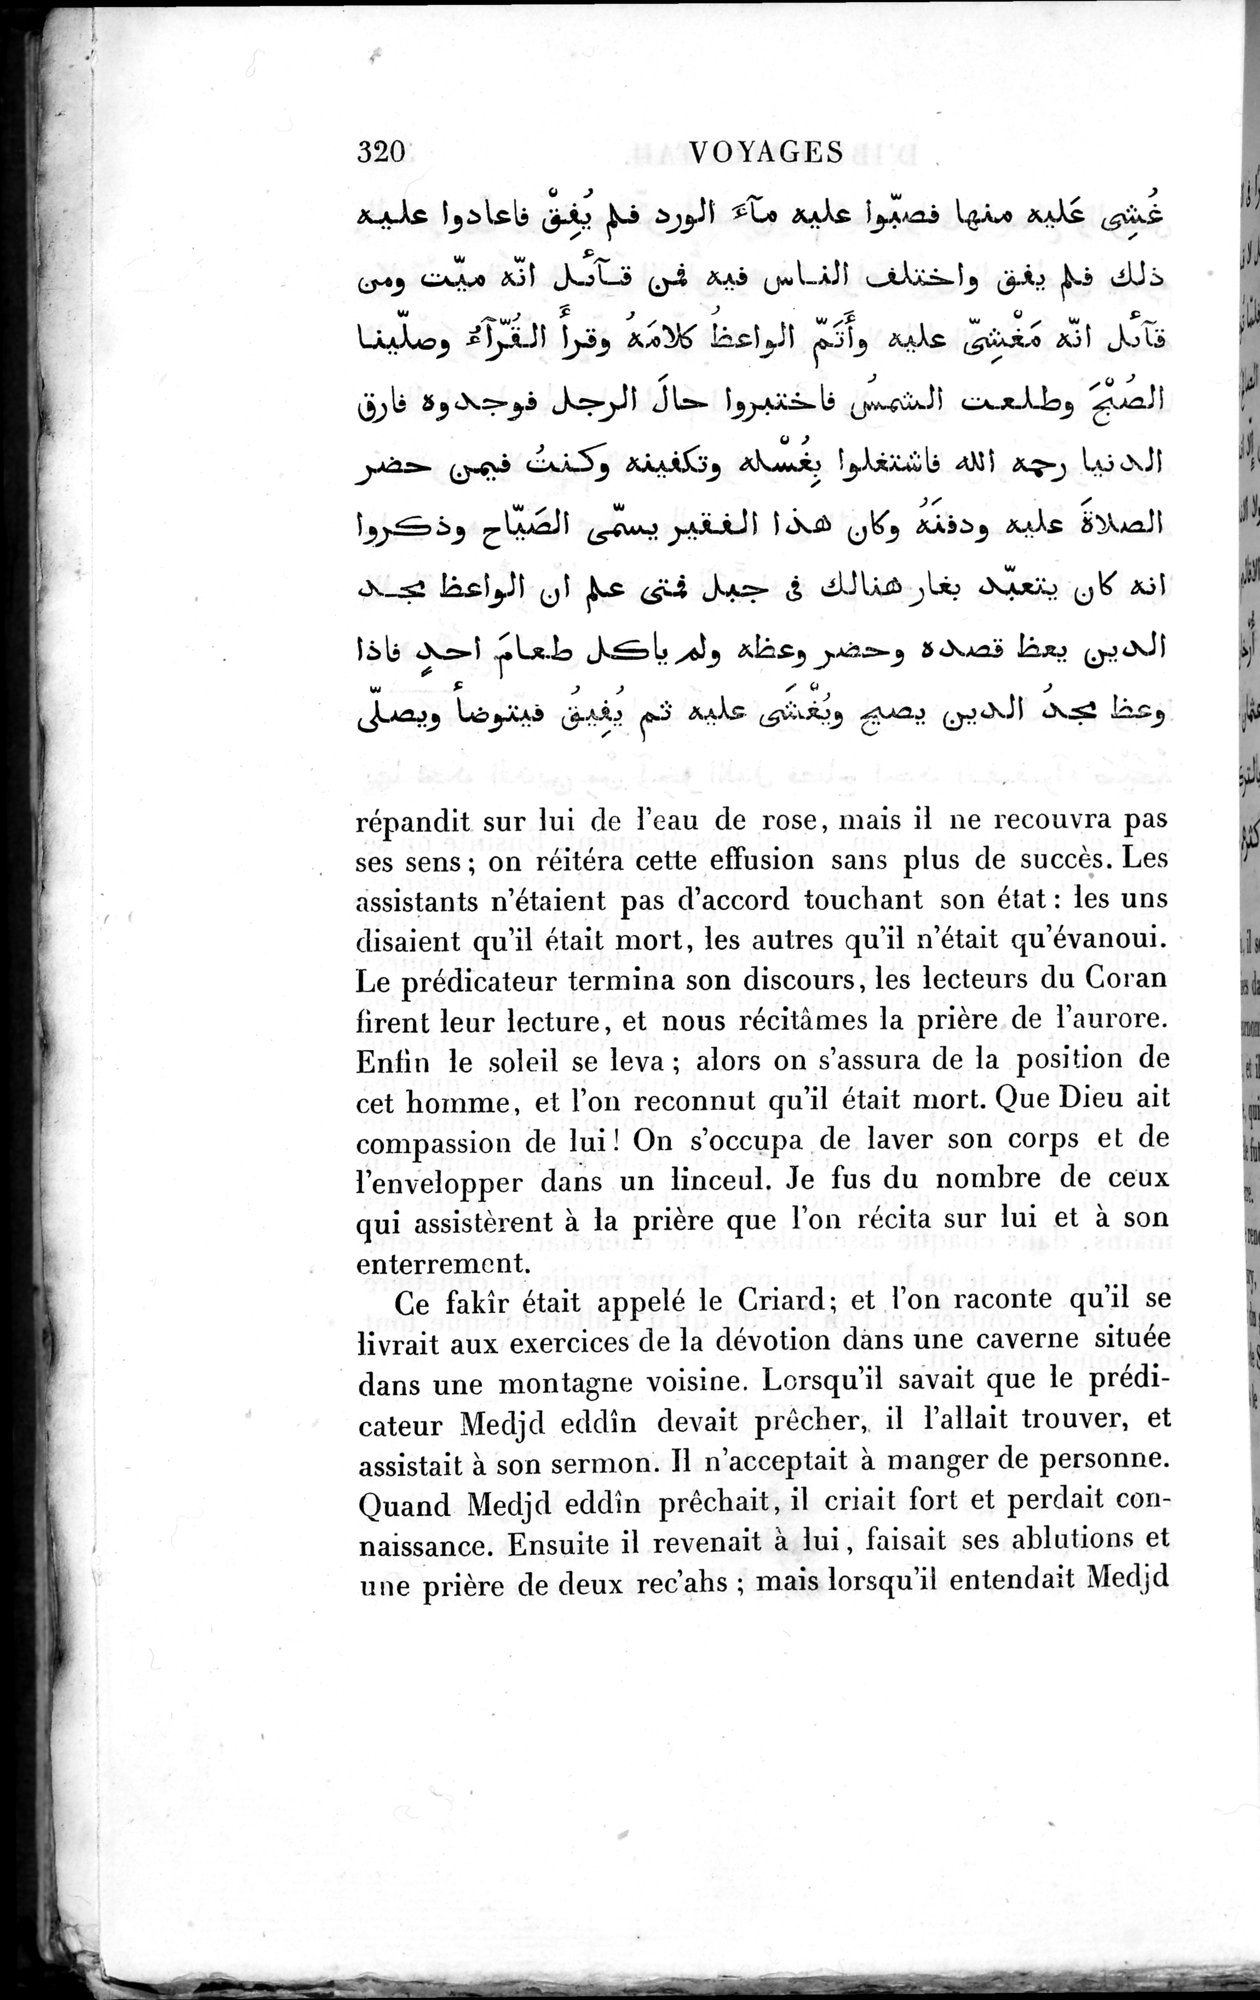 Voyages d'Ibn Batoutah : vol.2 / Page 348 (Grayscale High Resolution Image)